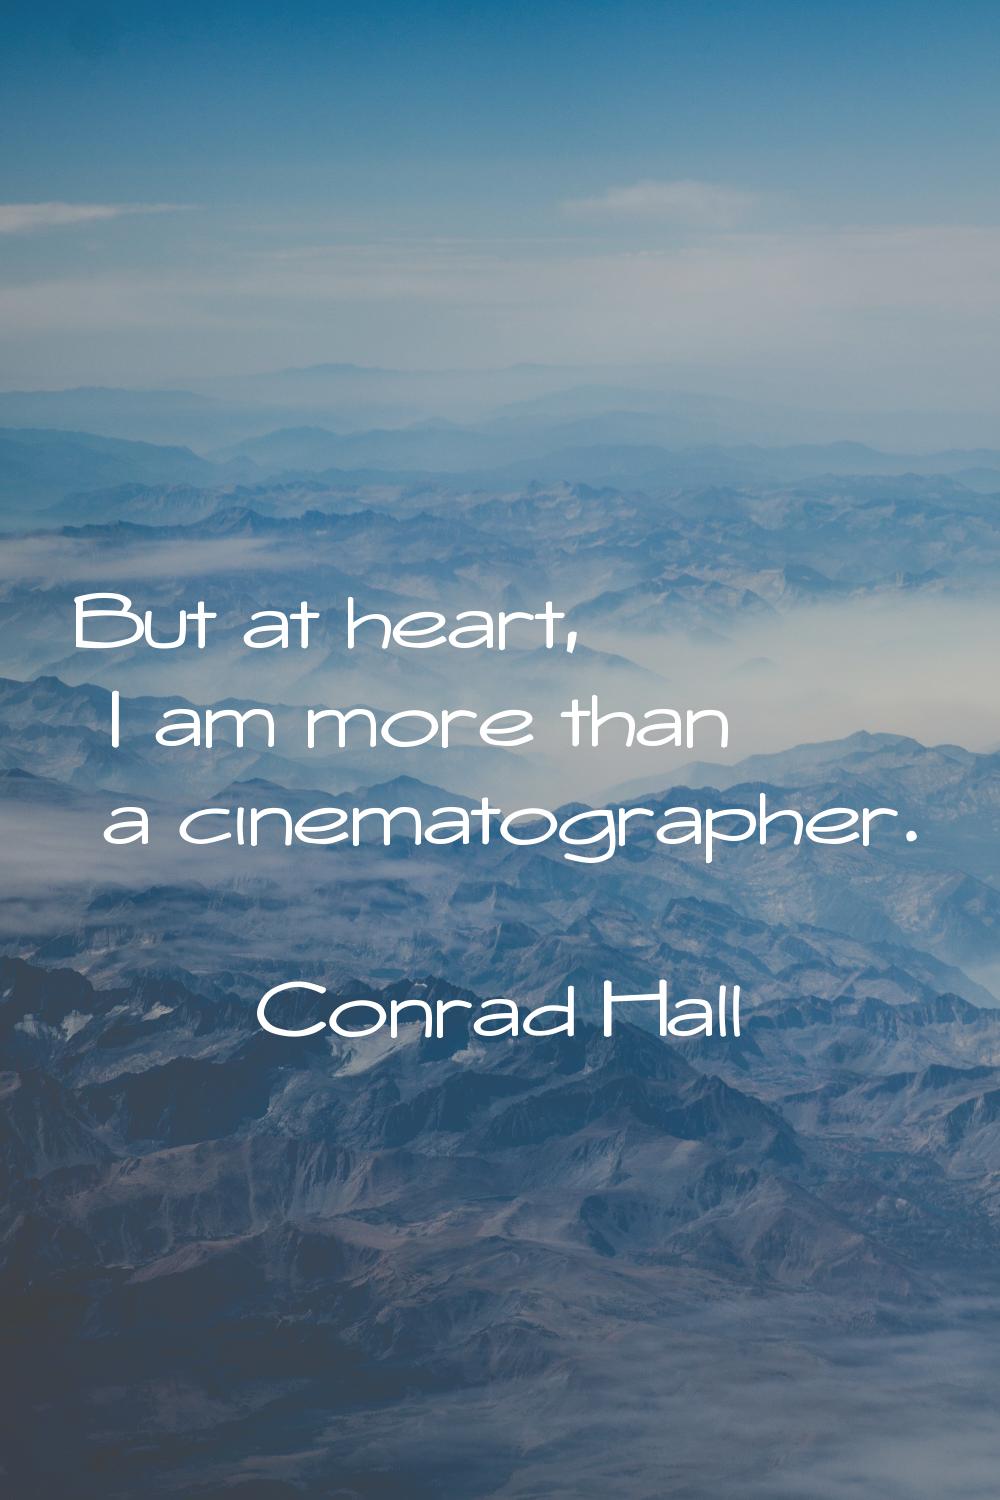 But at heart, I am more than a cinematographer.